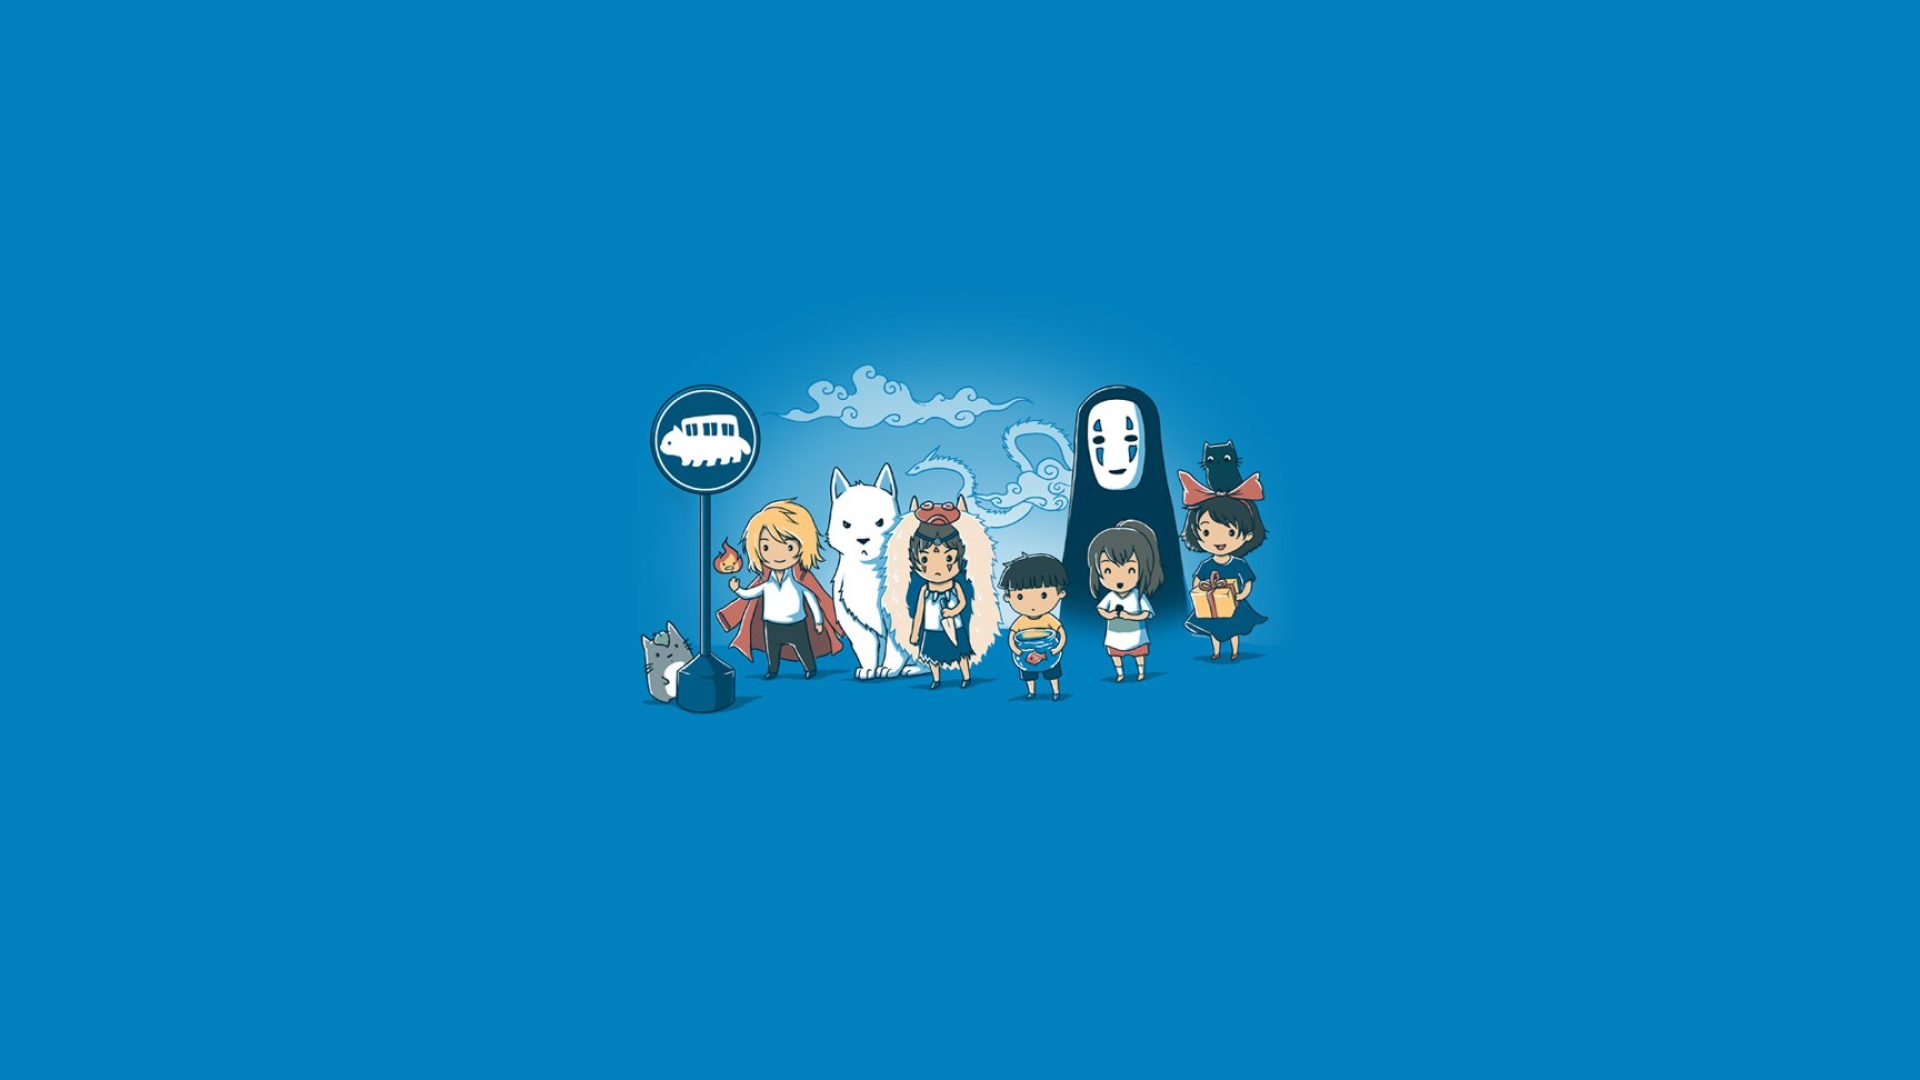 1920x1080 No Face Spirited Away Wallpapers Top Free No Face Spirited Away Backgrounds